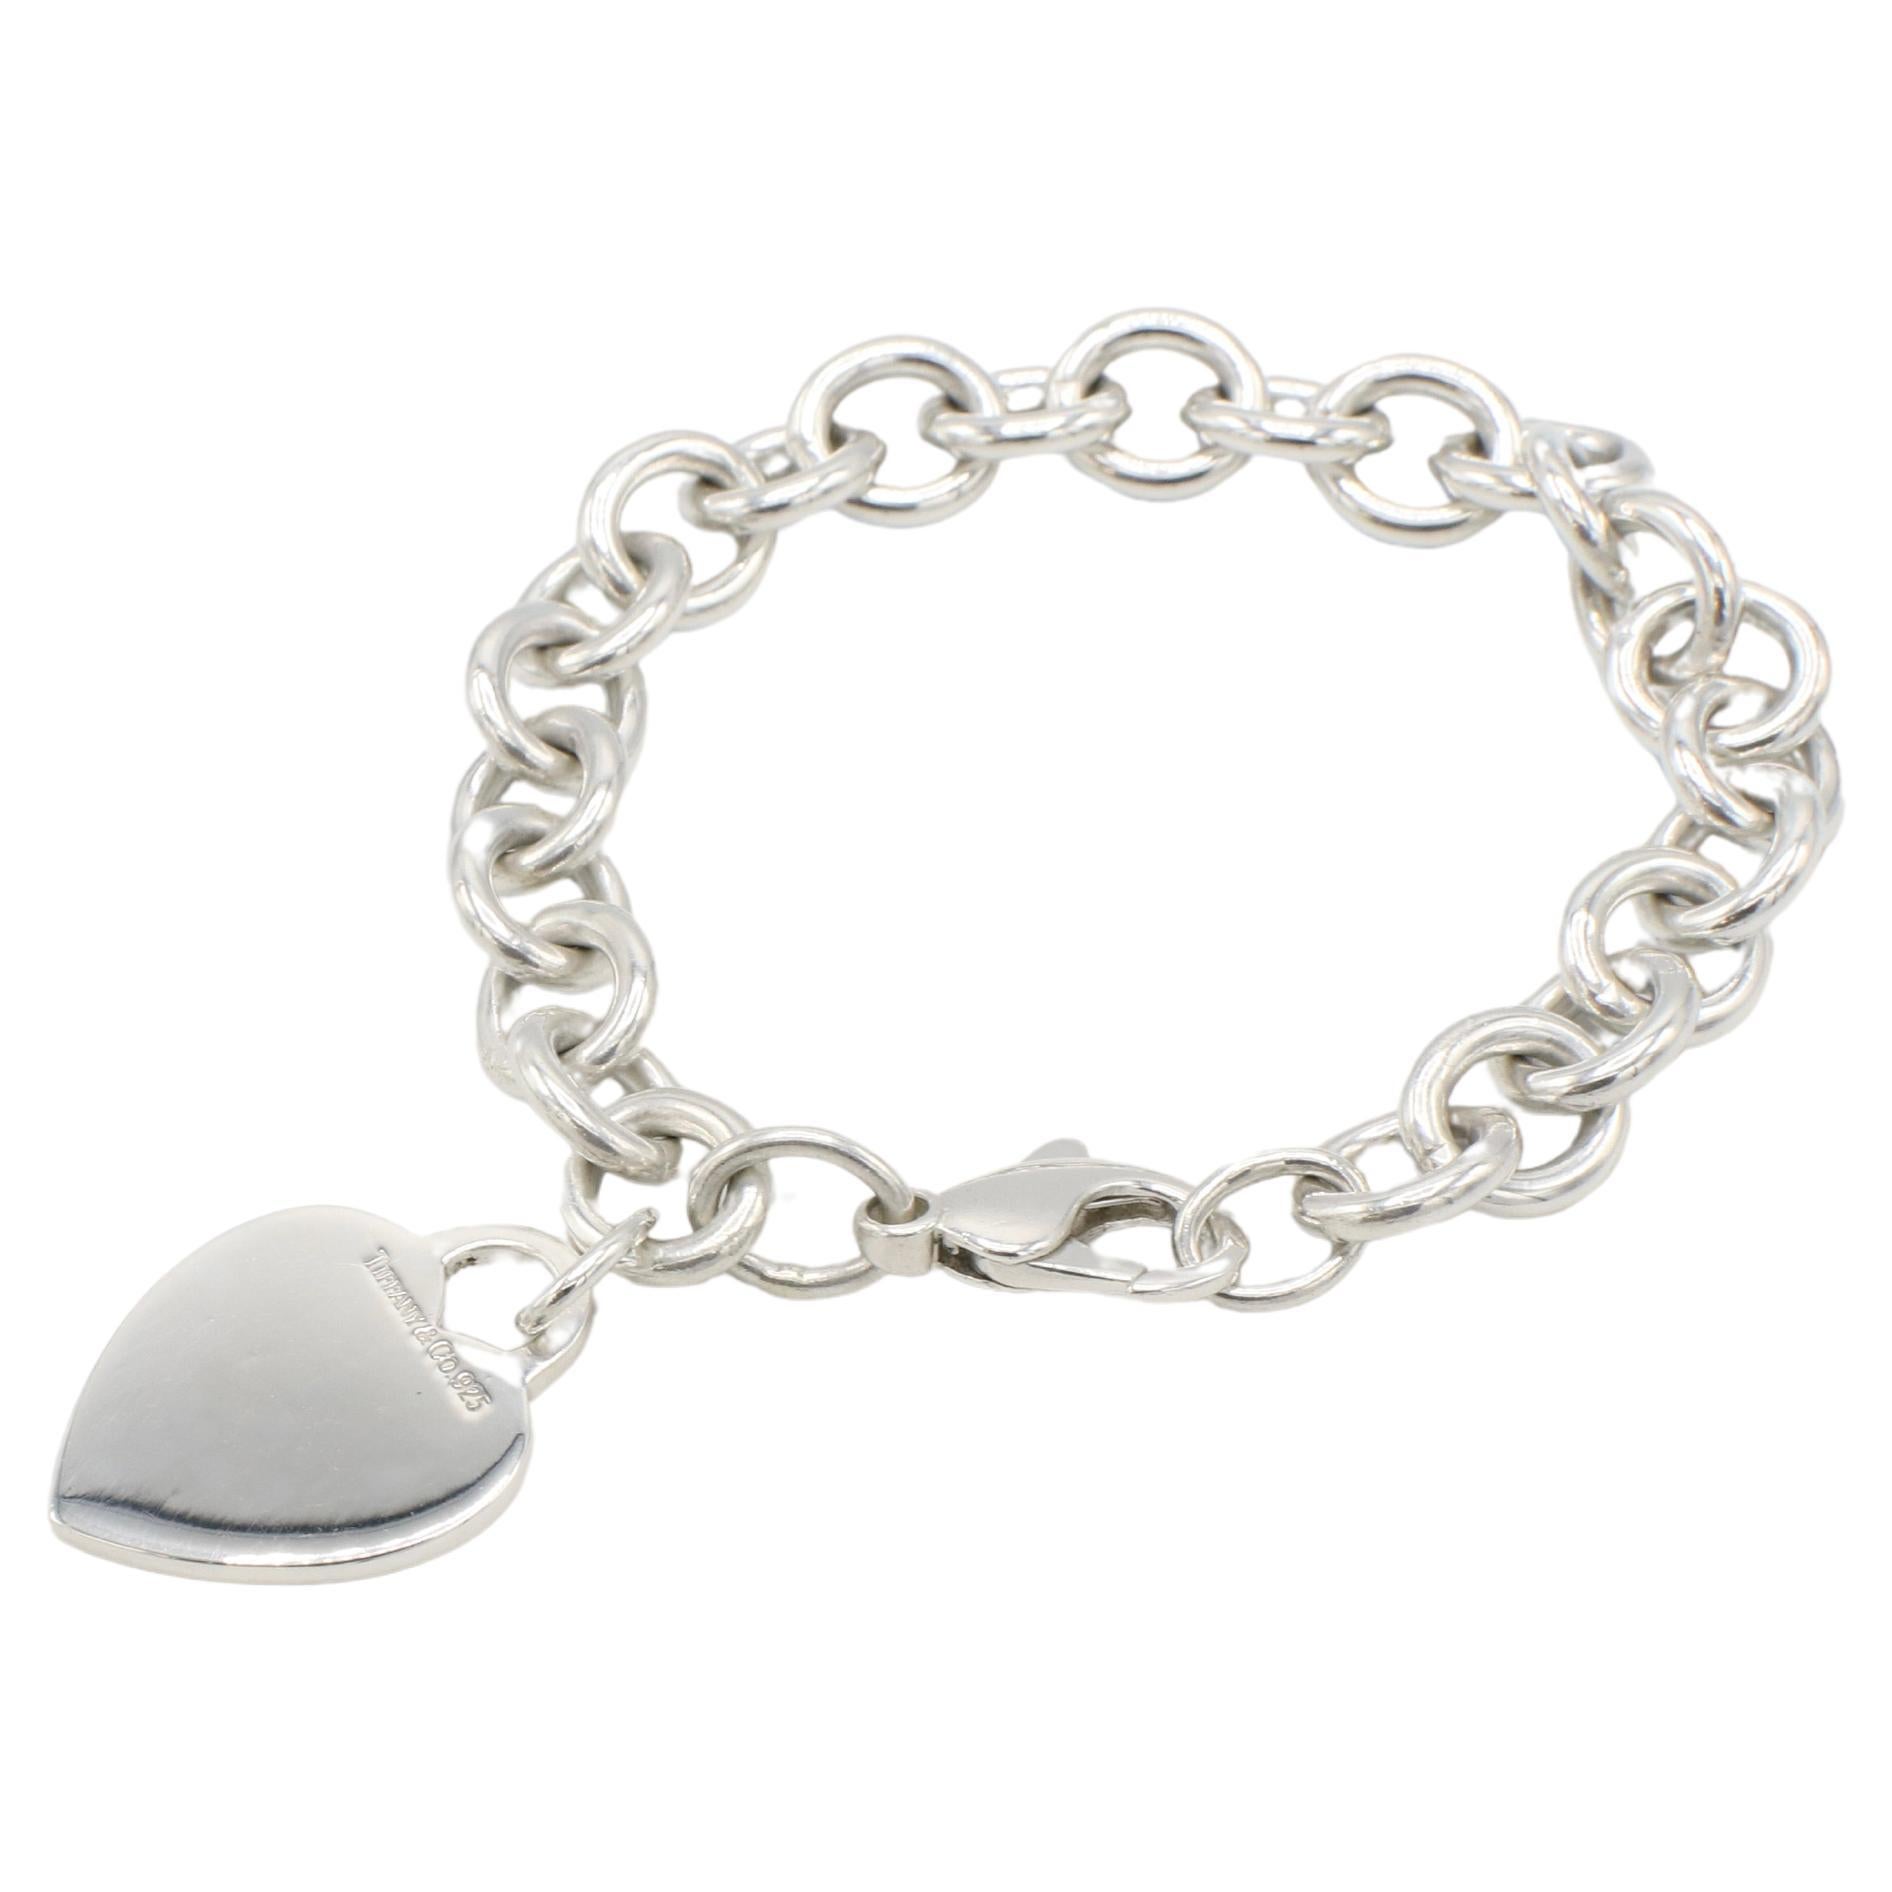 Tiffany & Co. Sterling Silver Heart Charm Circle Link Bracelet 
Metal: Sterling silver 925
Weight: 33.9 grams
Length: 7 inches
Links: 10 x 11mm
Heart: Plain, no engraving 